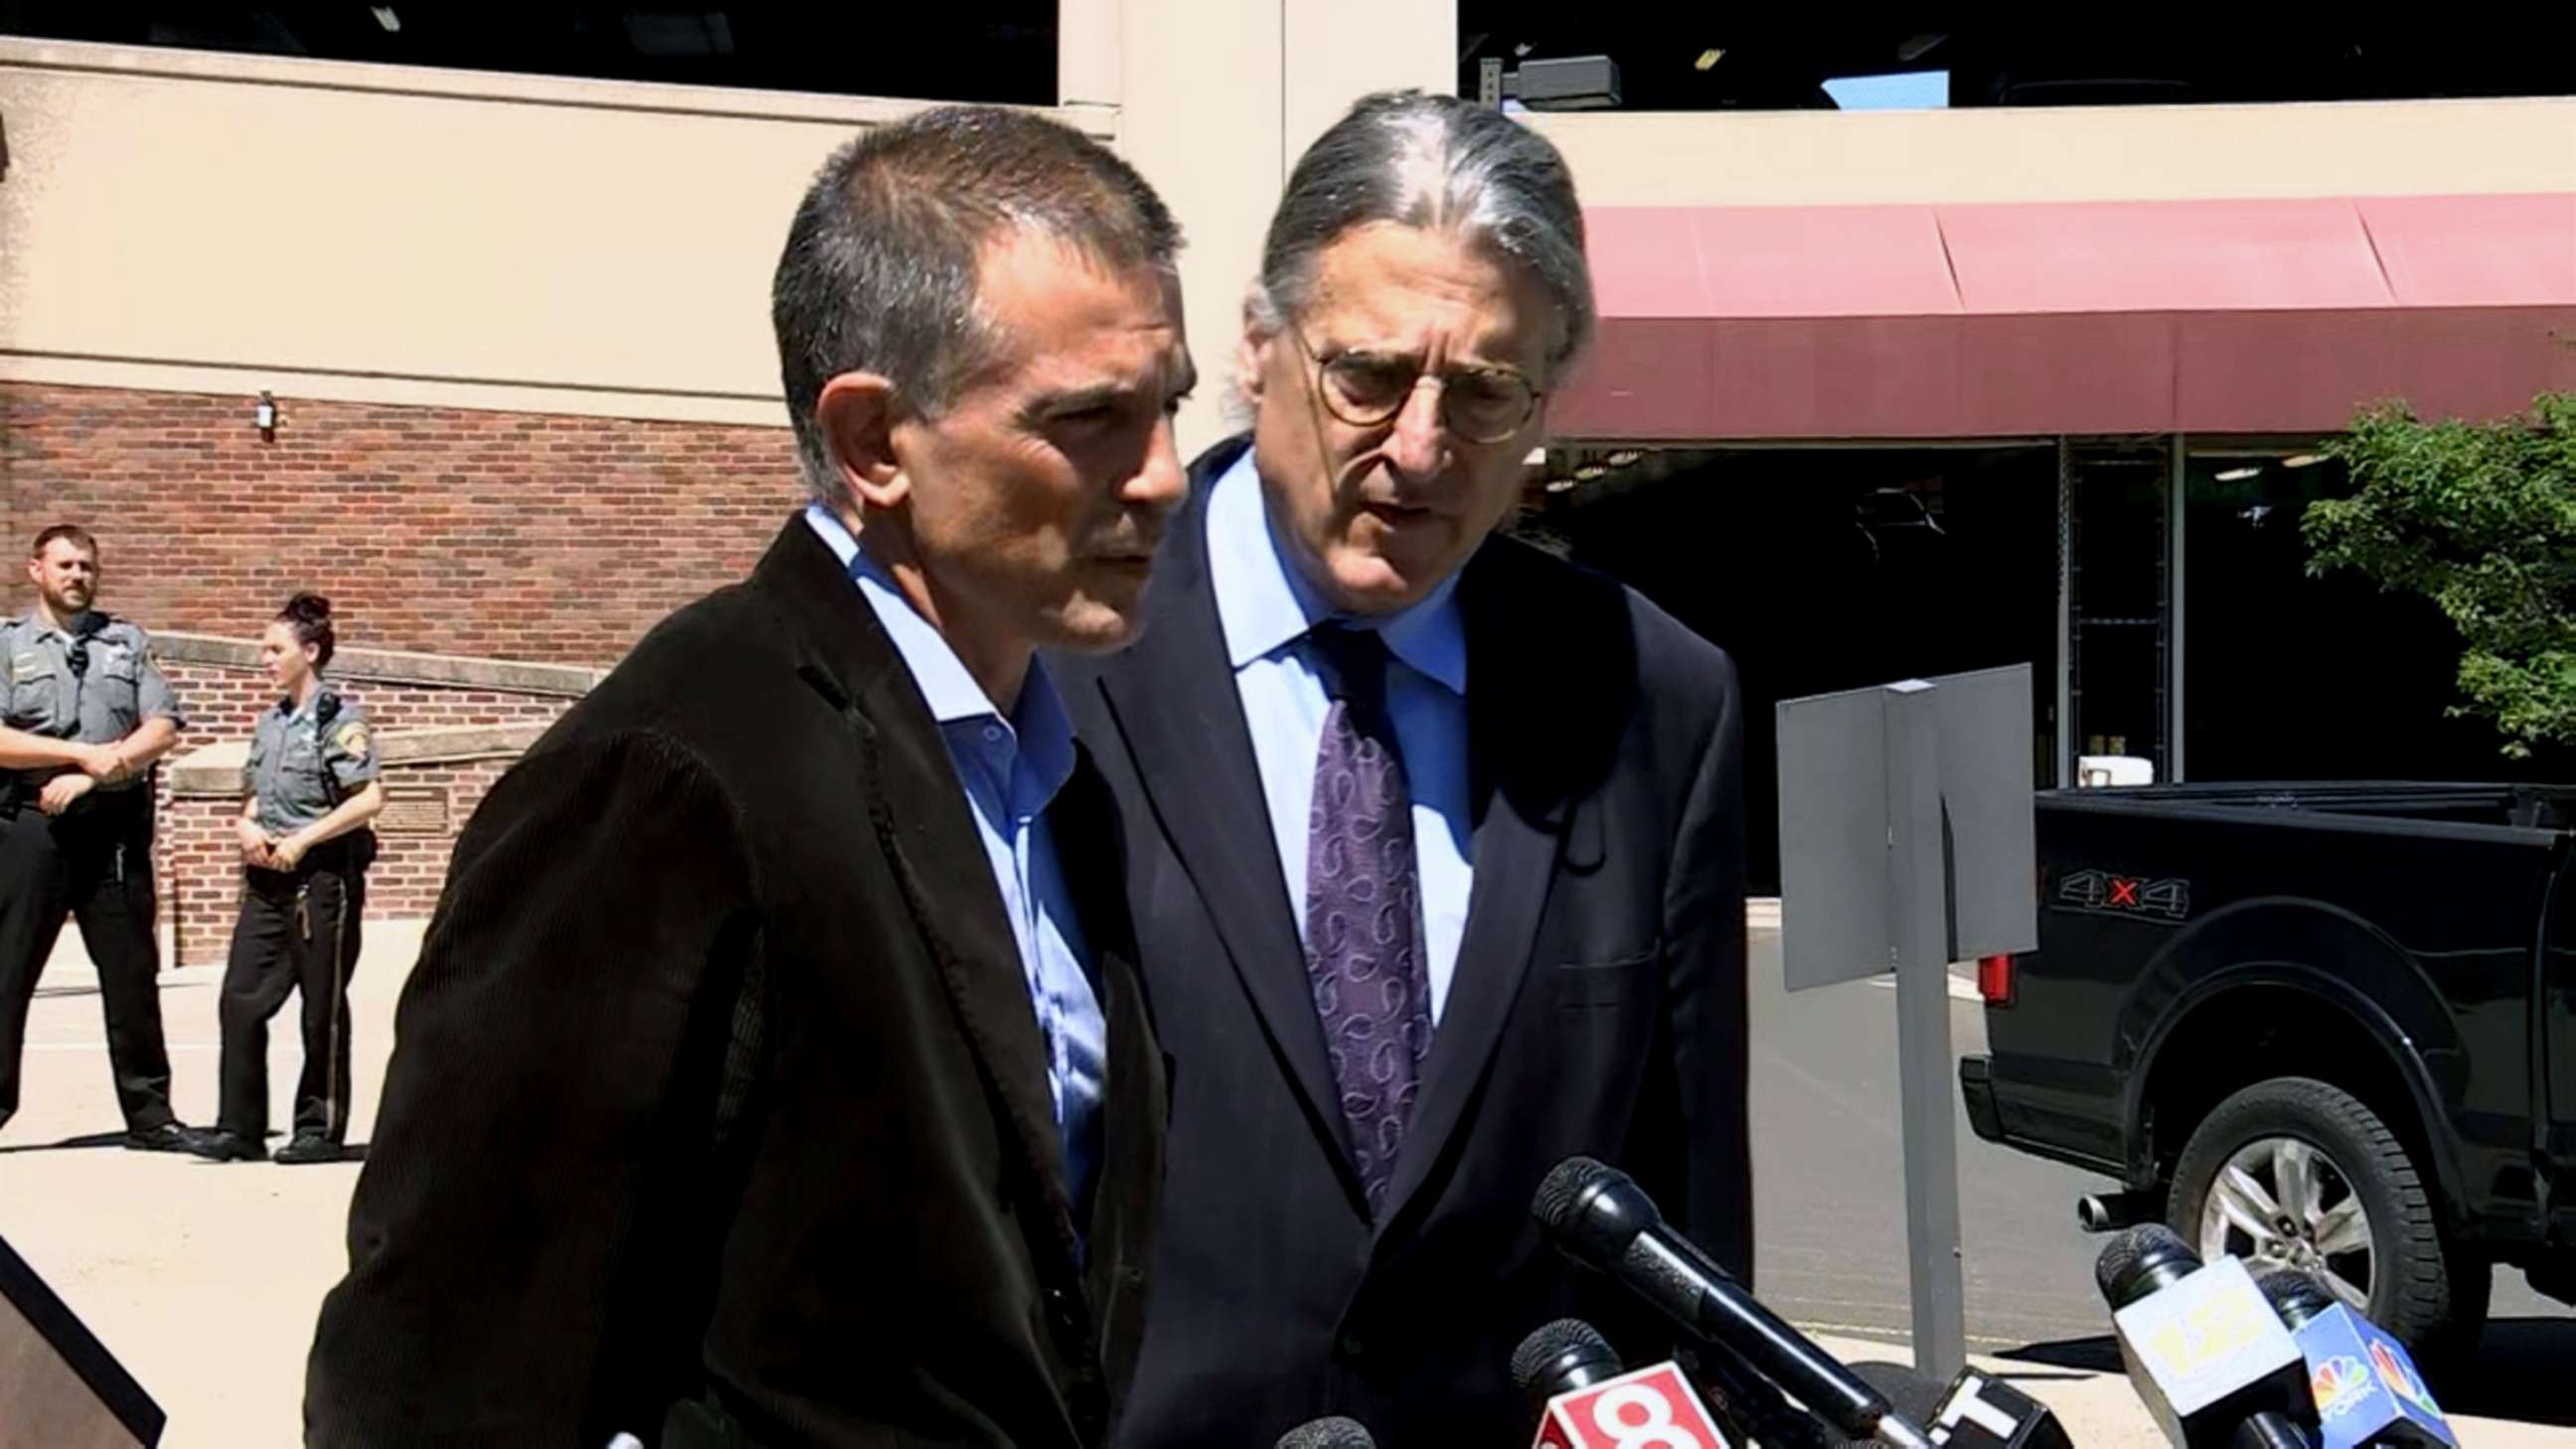 PHOTO: Fotis Dulos spoke to the media after court on  June 26, 2019 in Connecticut.